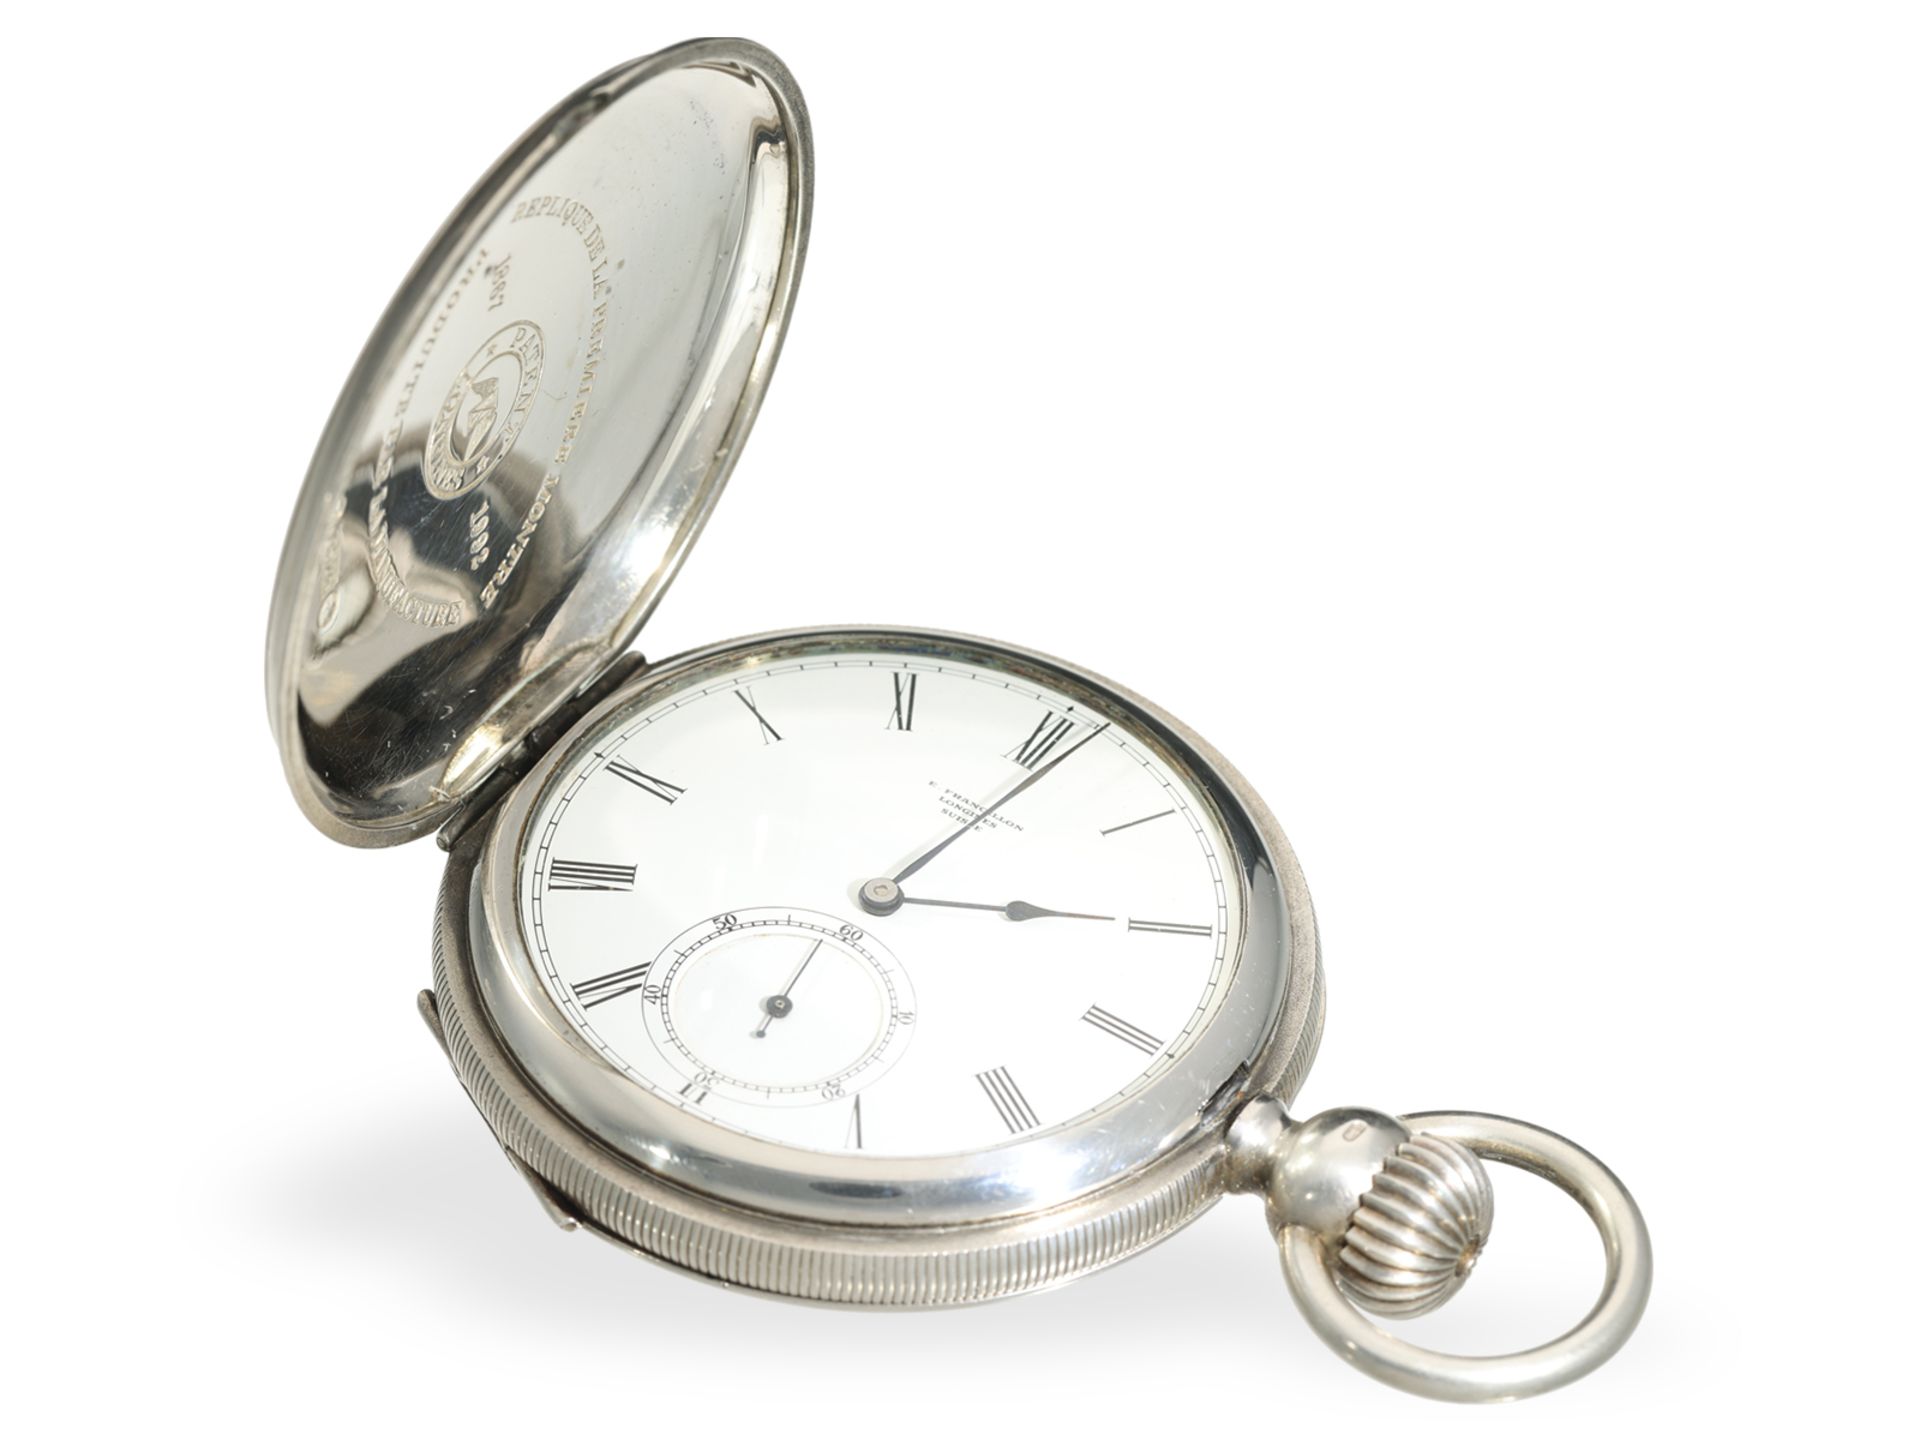 Pocket watch: rare, limited Longines Ernest Francillon 125th "1867" Ref. 840.8022, 399/1000 - Image 7 of 7